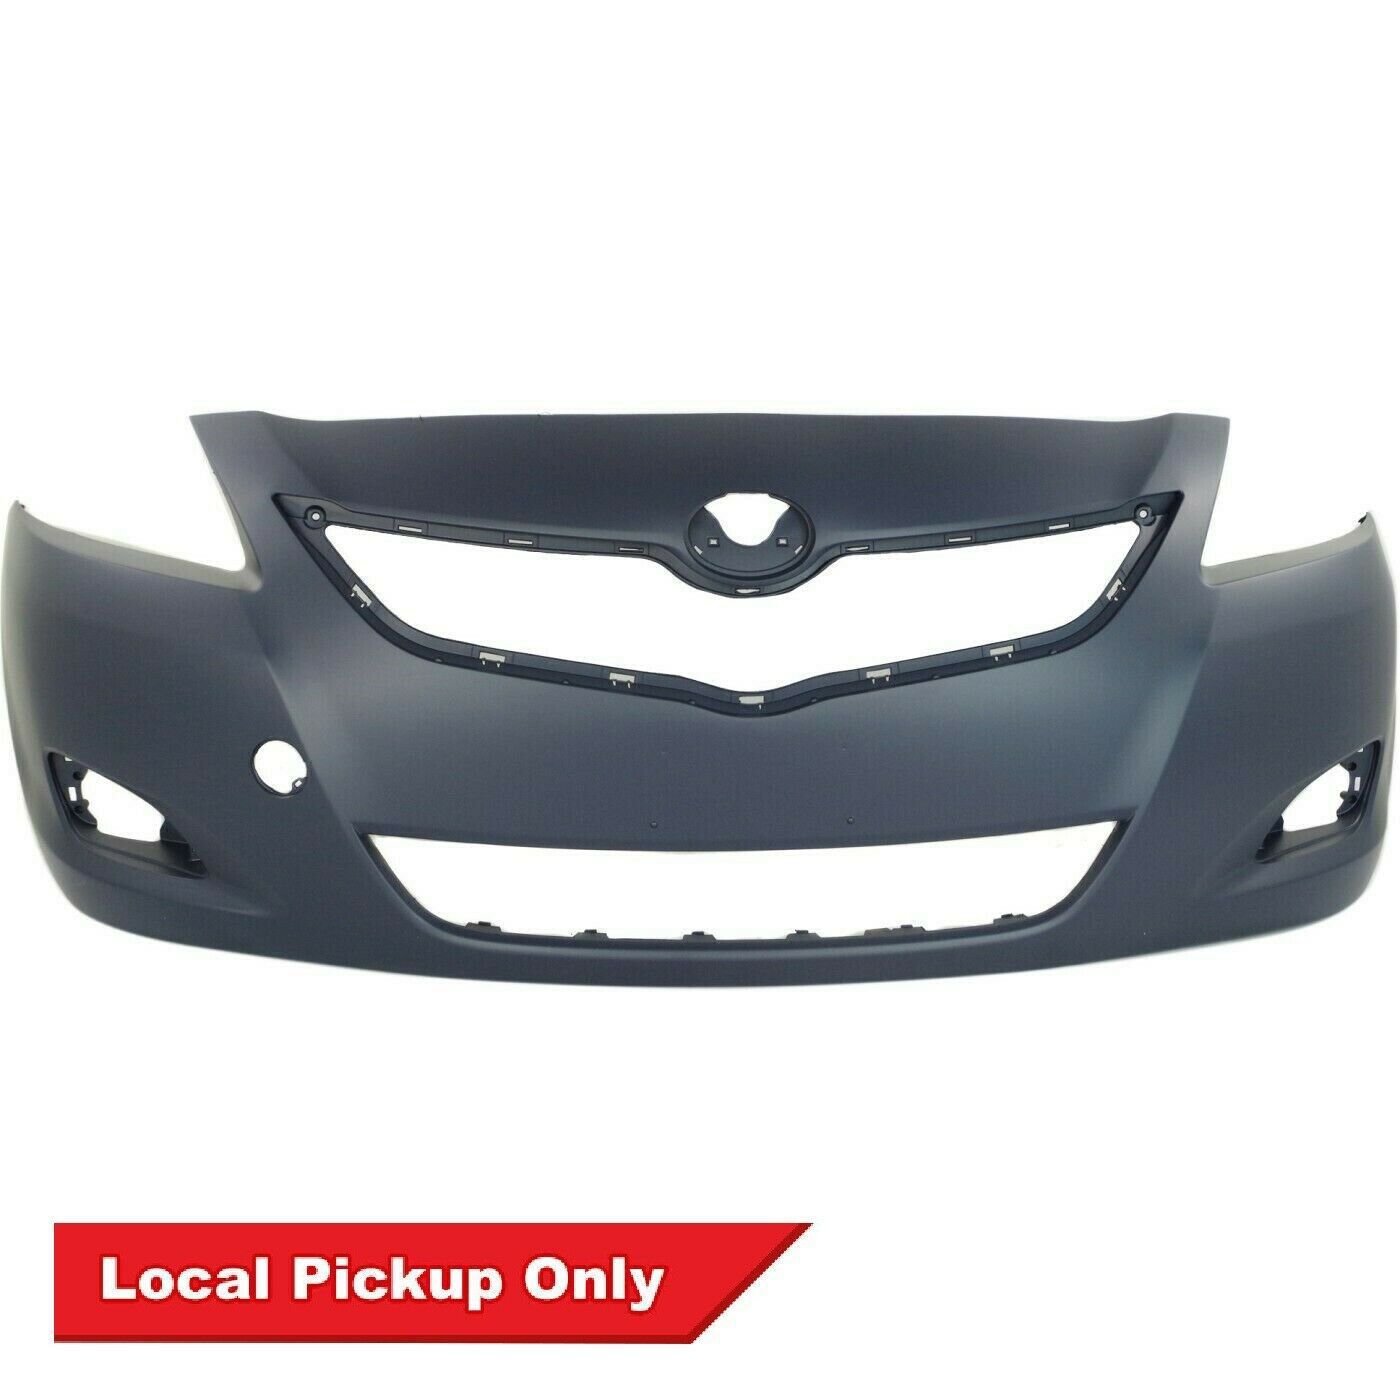 New Aftermarket FRONT BUMPER COVER FOR 2007-2012 TOYOTA YARIS SEDAN TO1000321